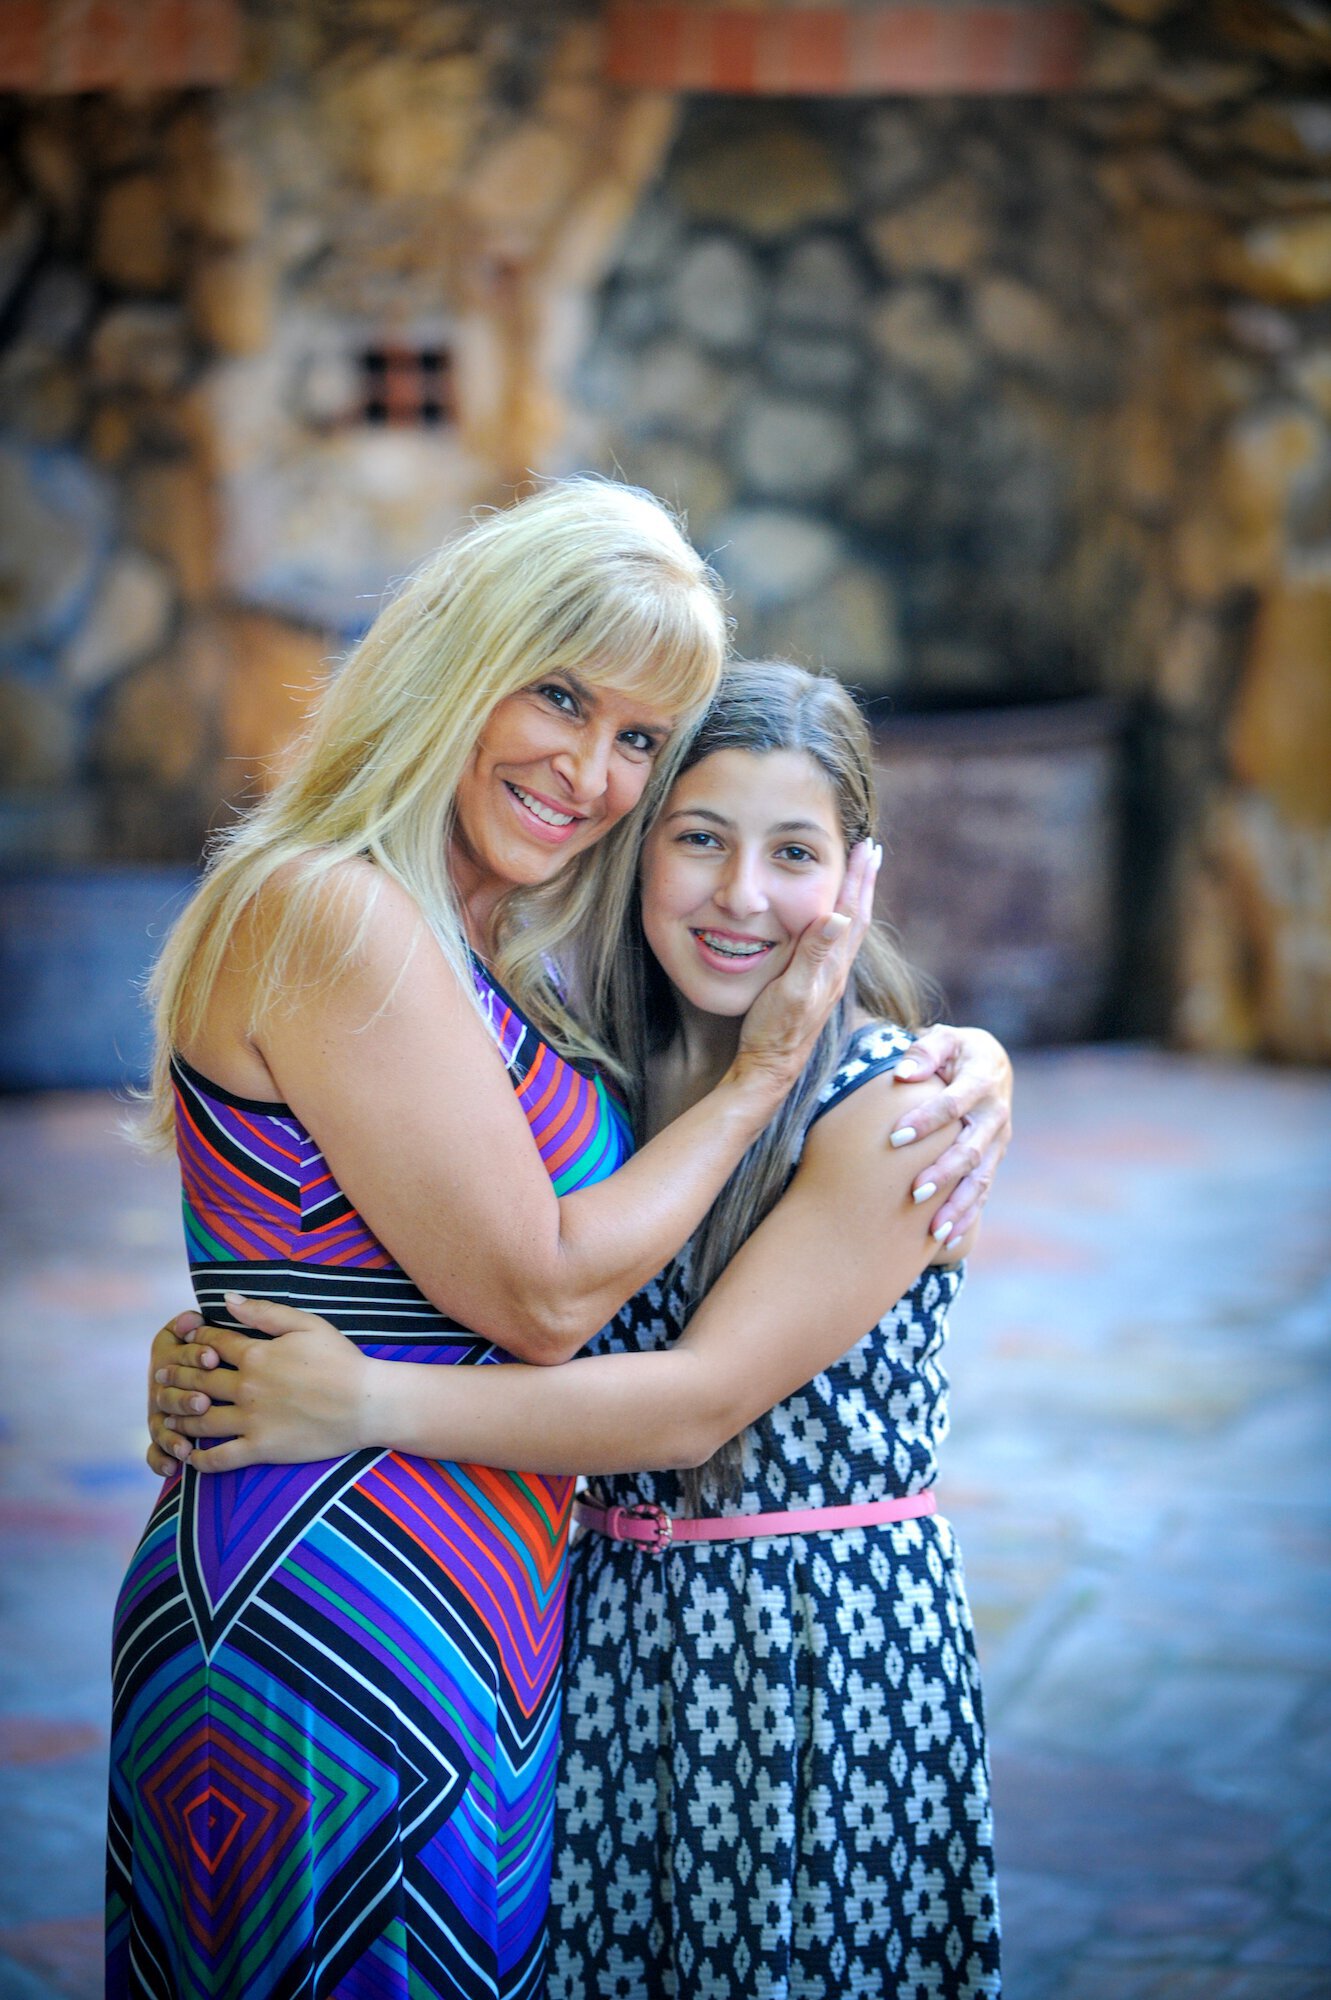 Dr. Durkin's Facelift patient with her daughter